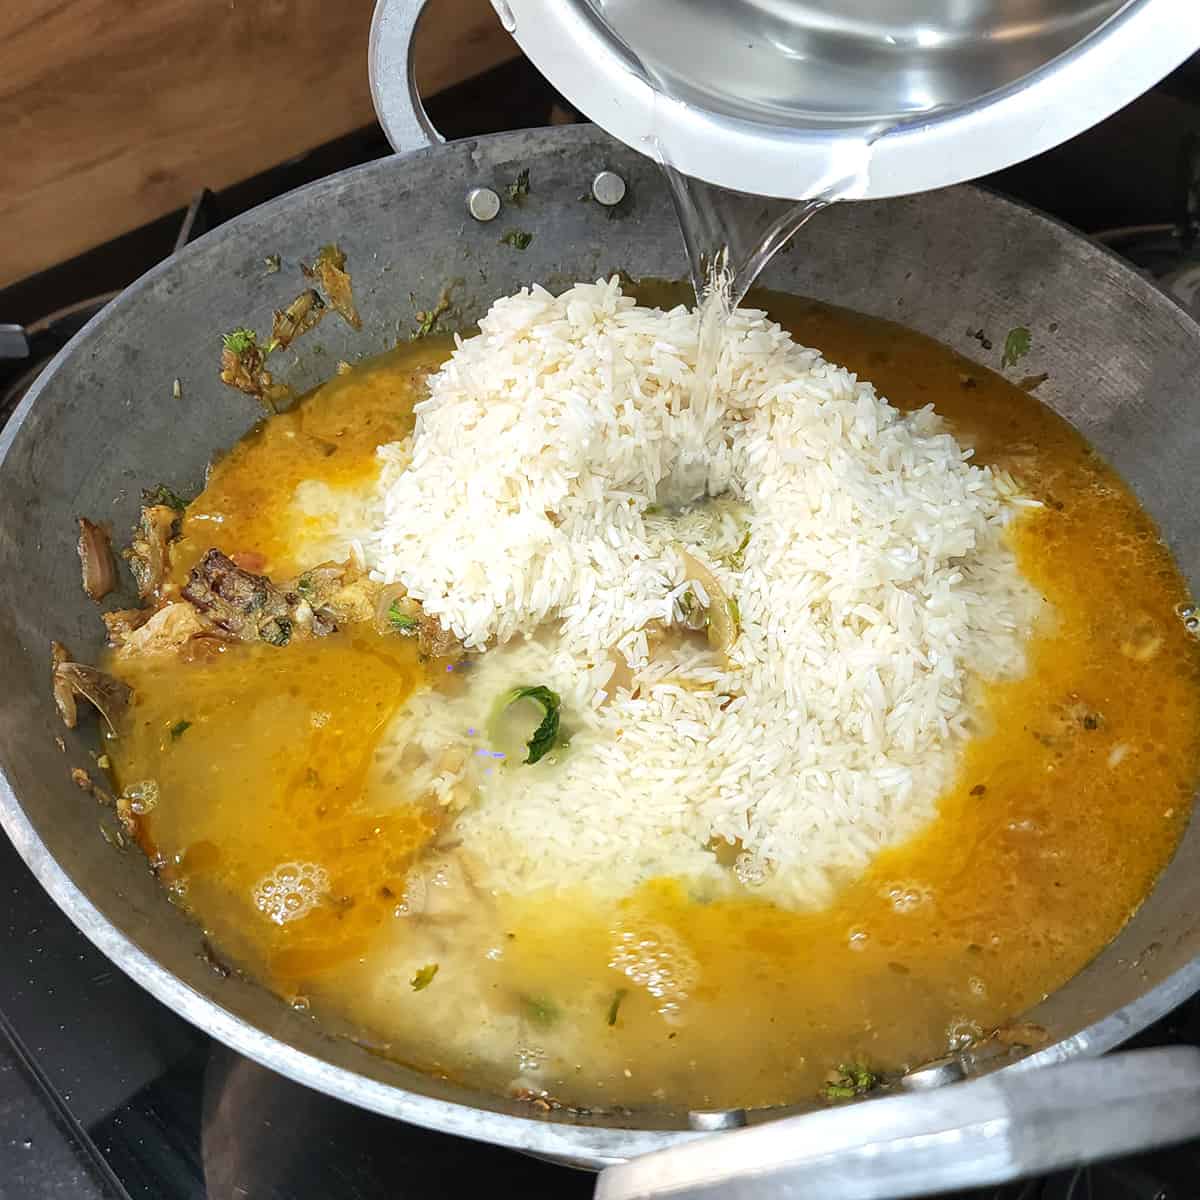 Add water to the pan to cook the rice.